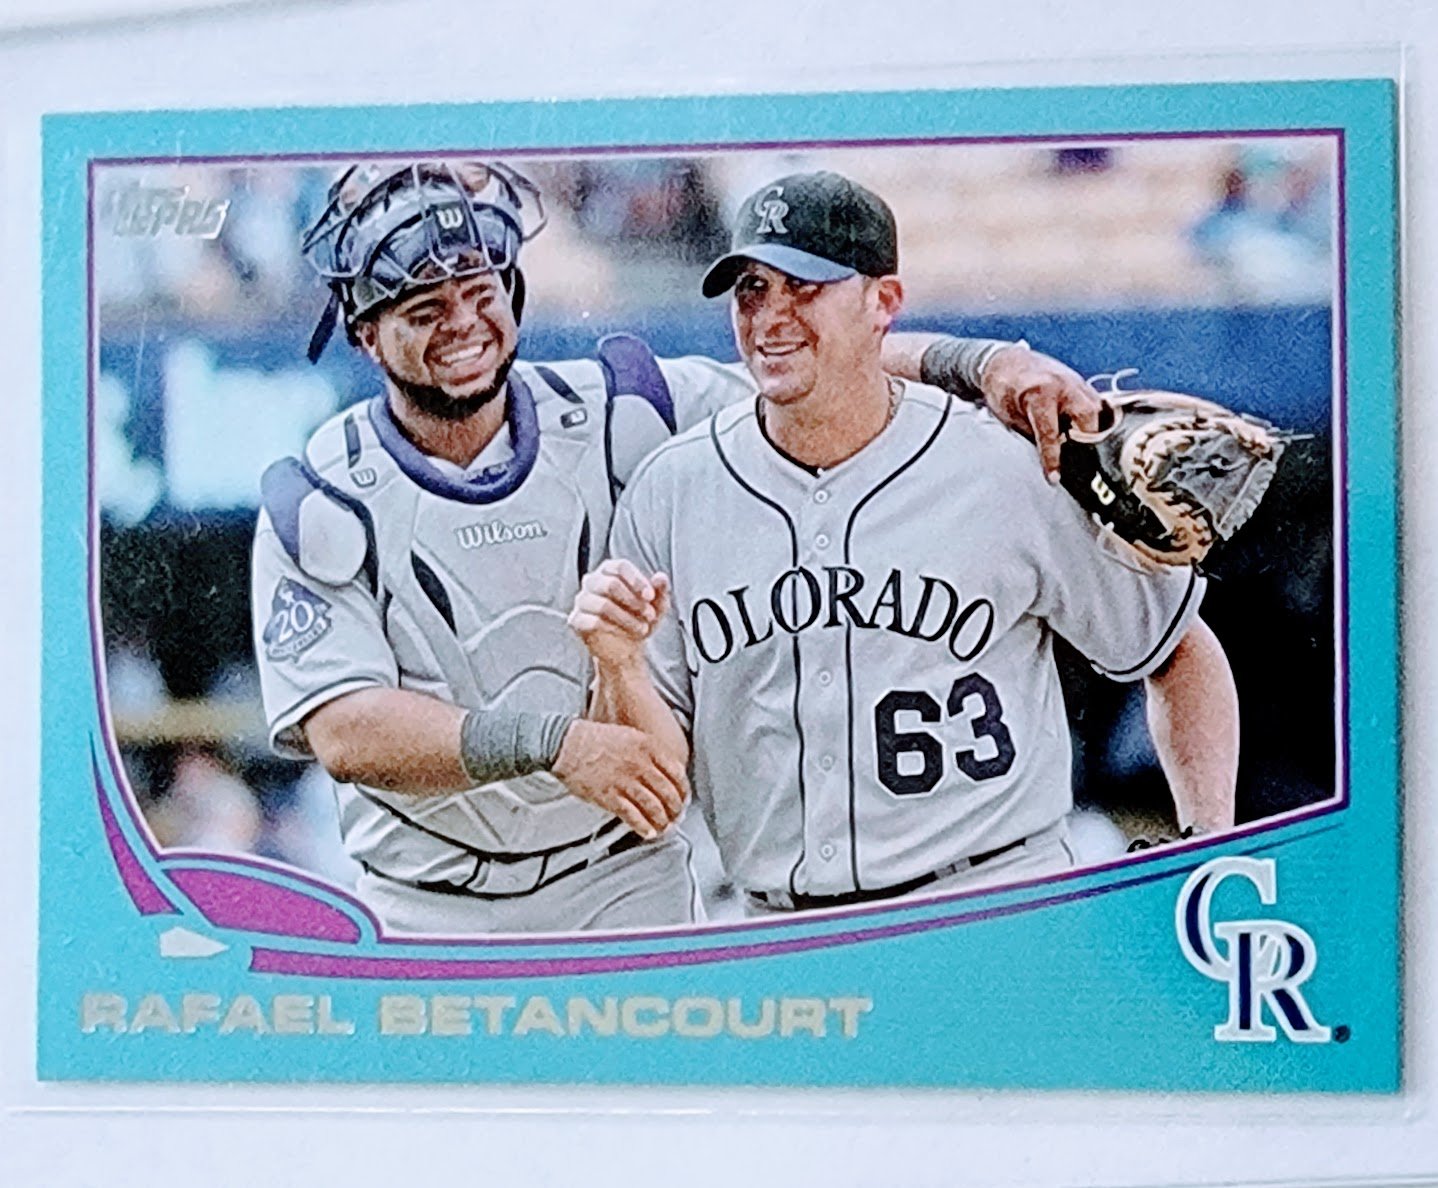 2013 Topps Update Rafael Betancourt Blue Bordered Baseball Card TPTV simple Xclusive Collectibles   